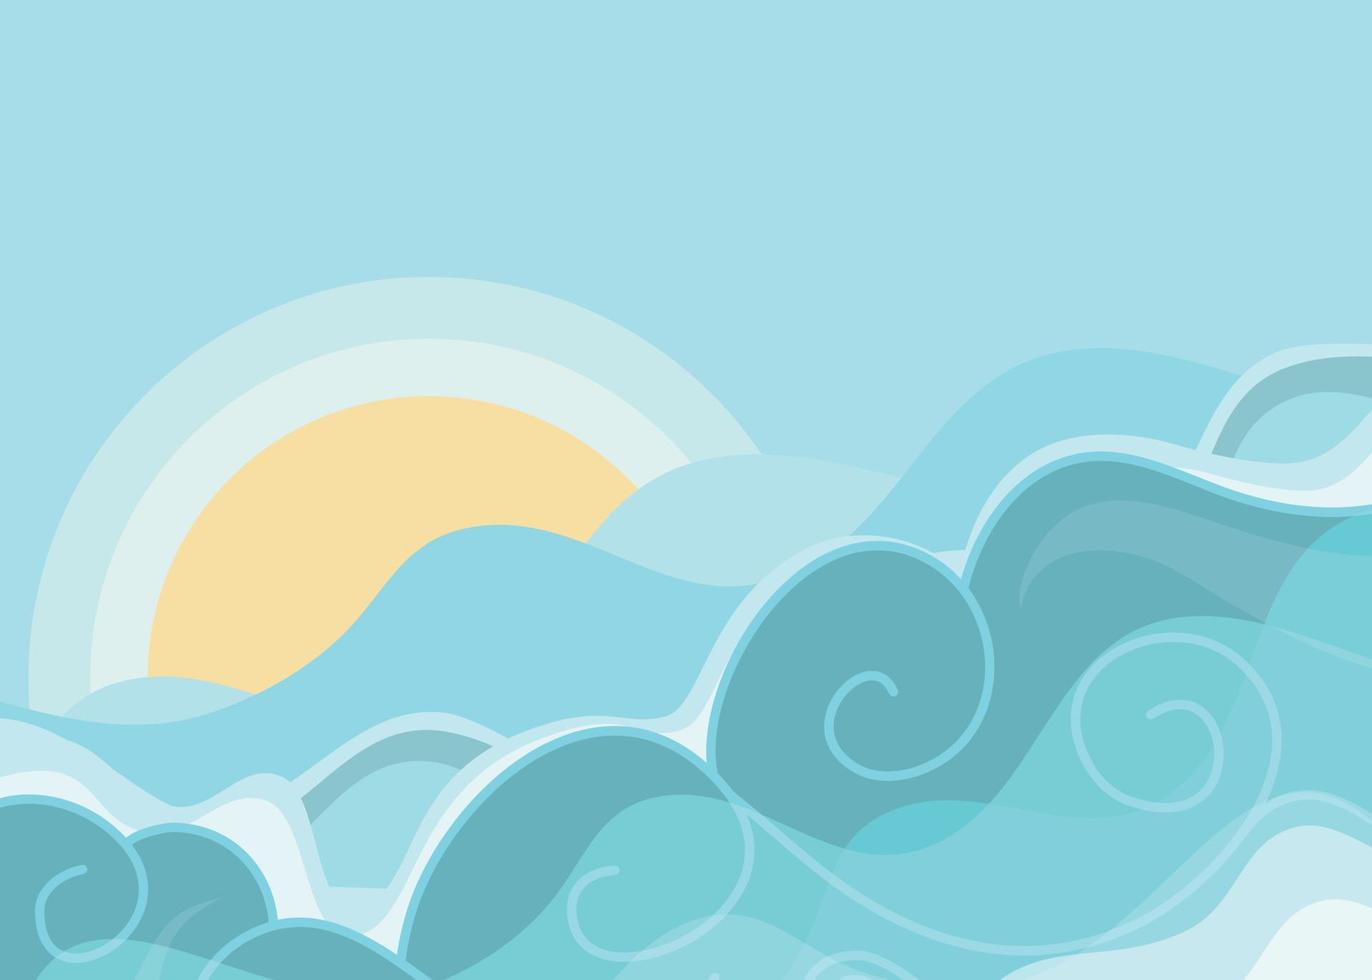 Abstract Asian Traditional Clouds Wallpaper Illustration. Vector Background.